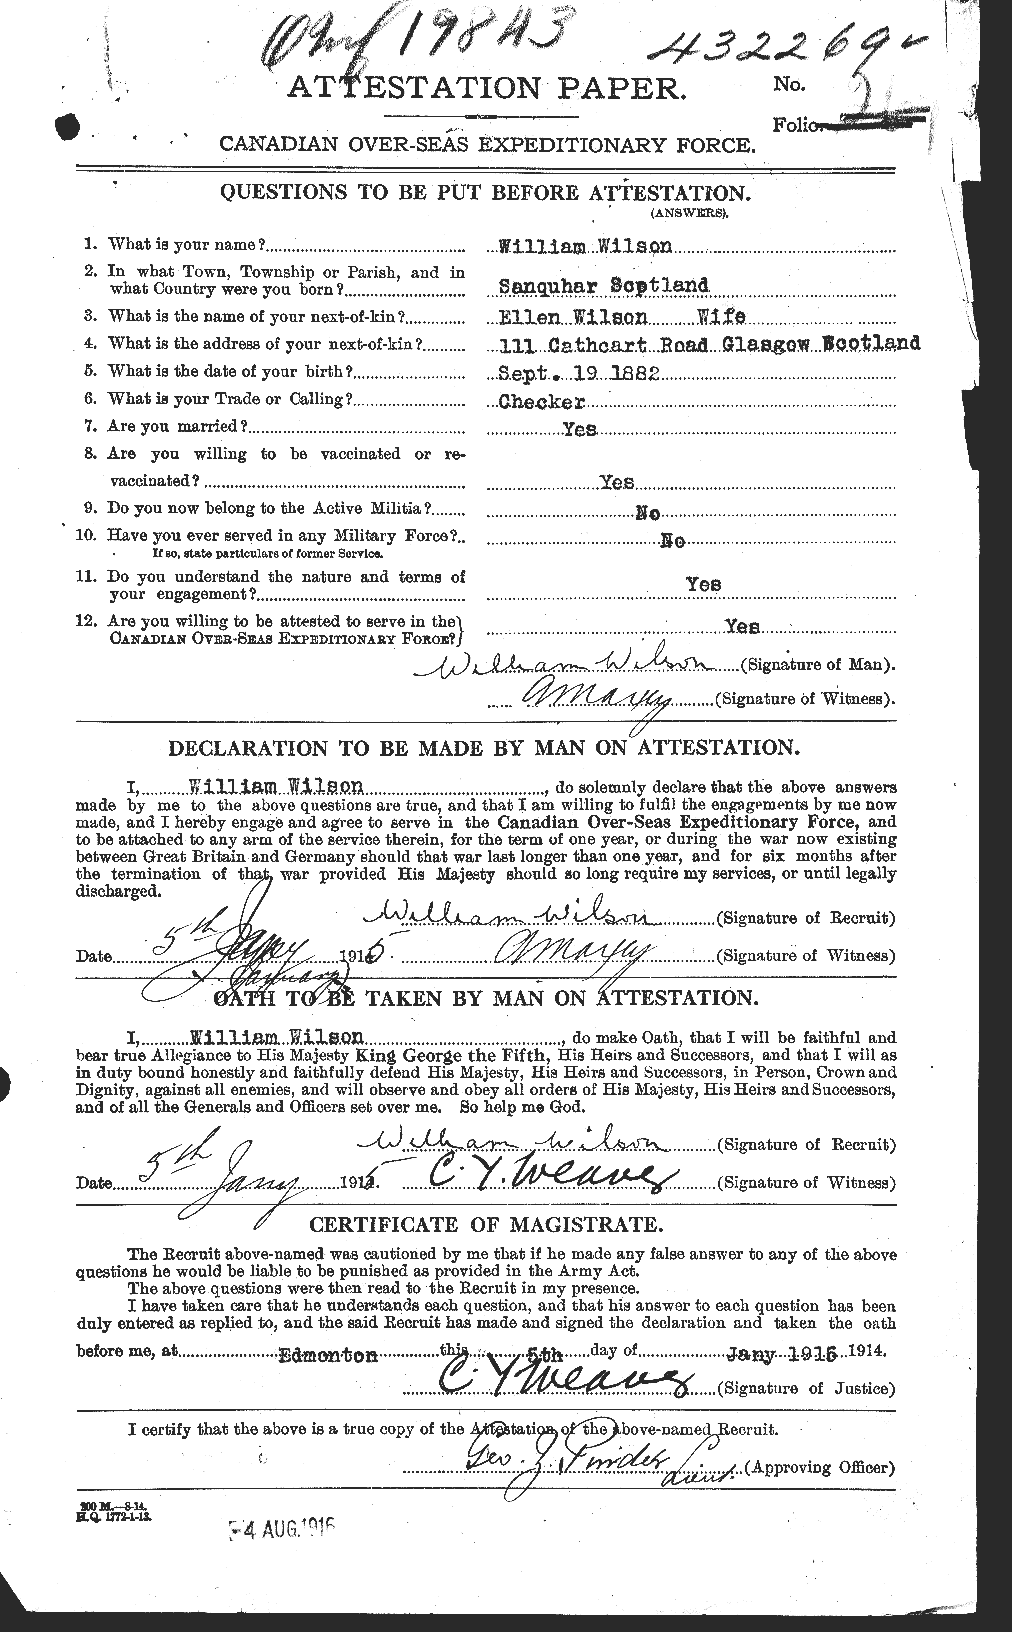 Personnel Records of the First World War - CEF 681855a